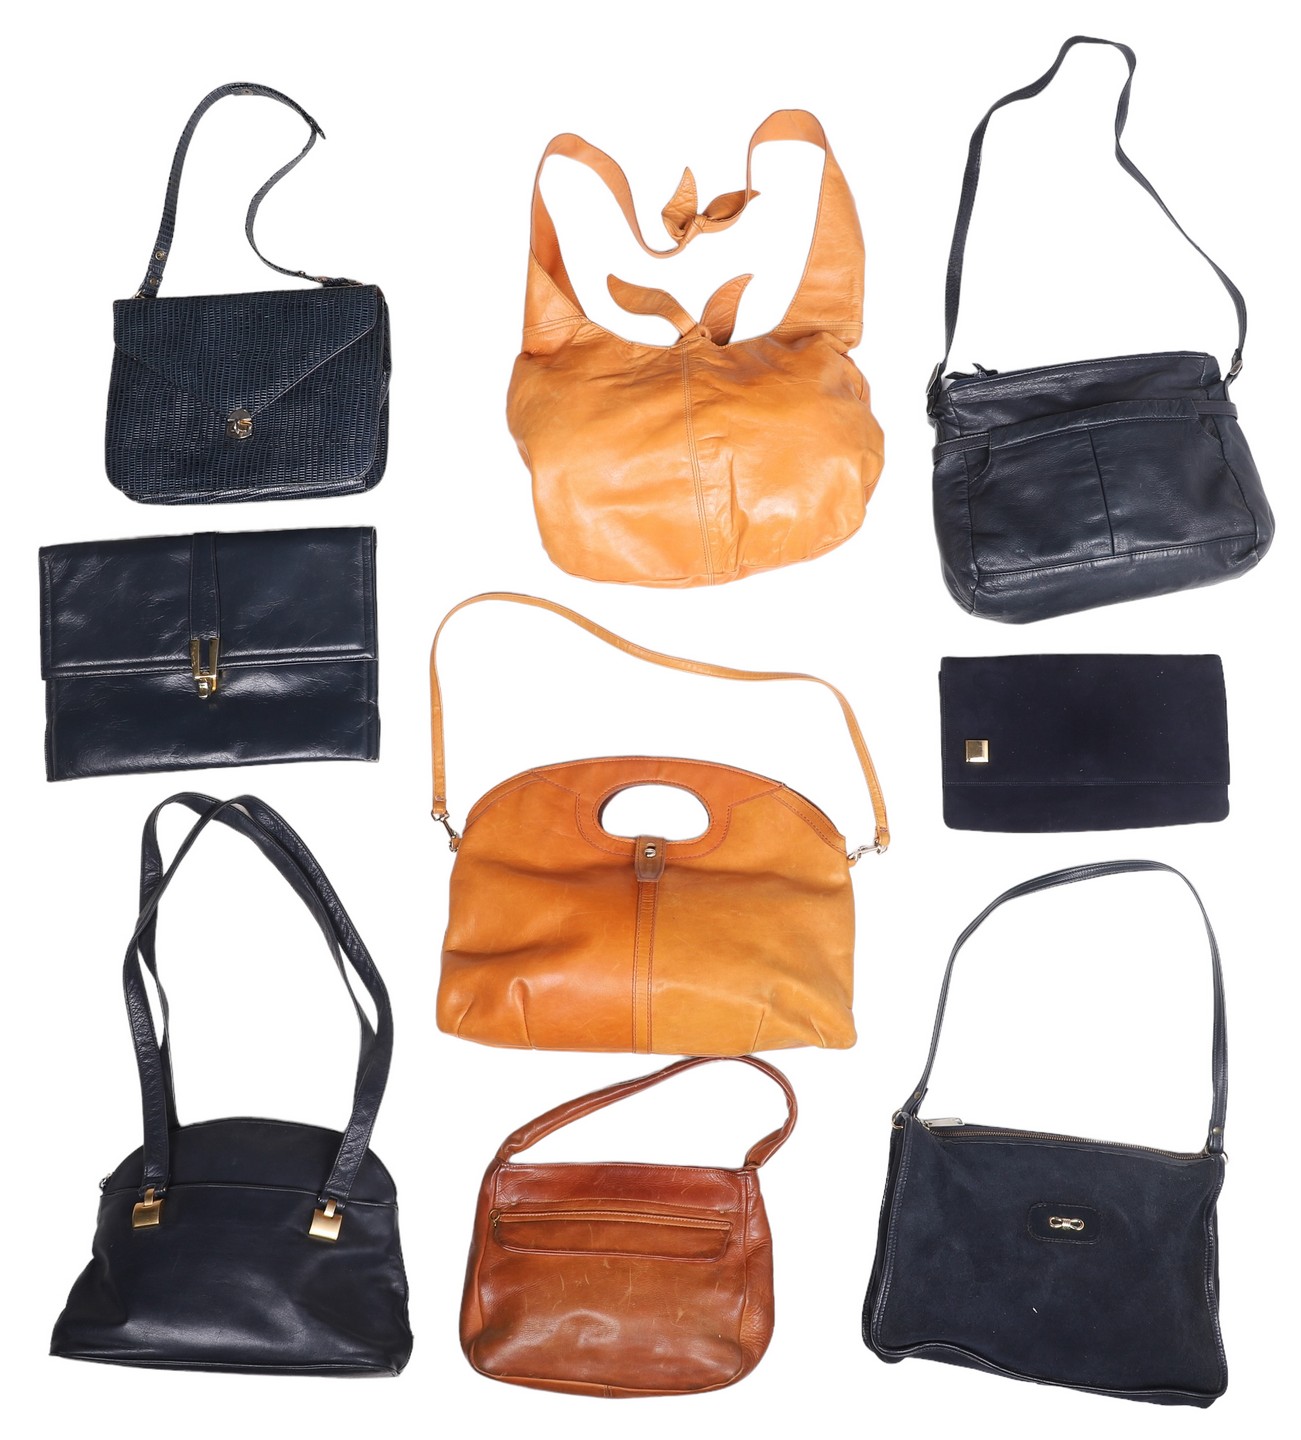  9 1960 s leather purses to include 27a6f1